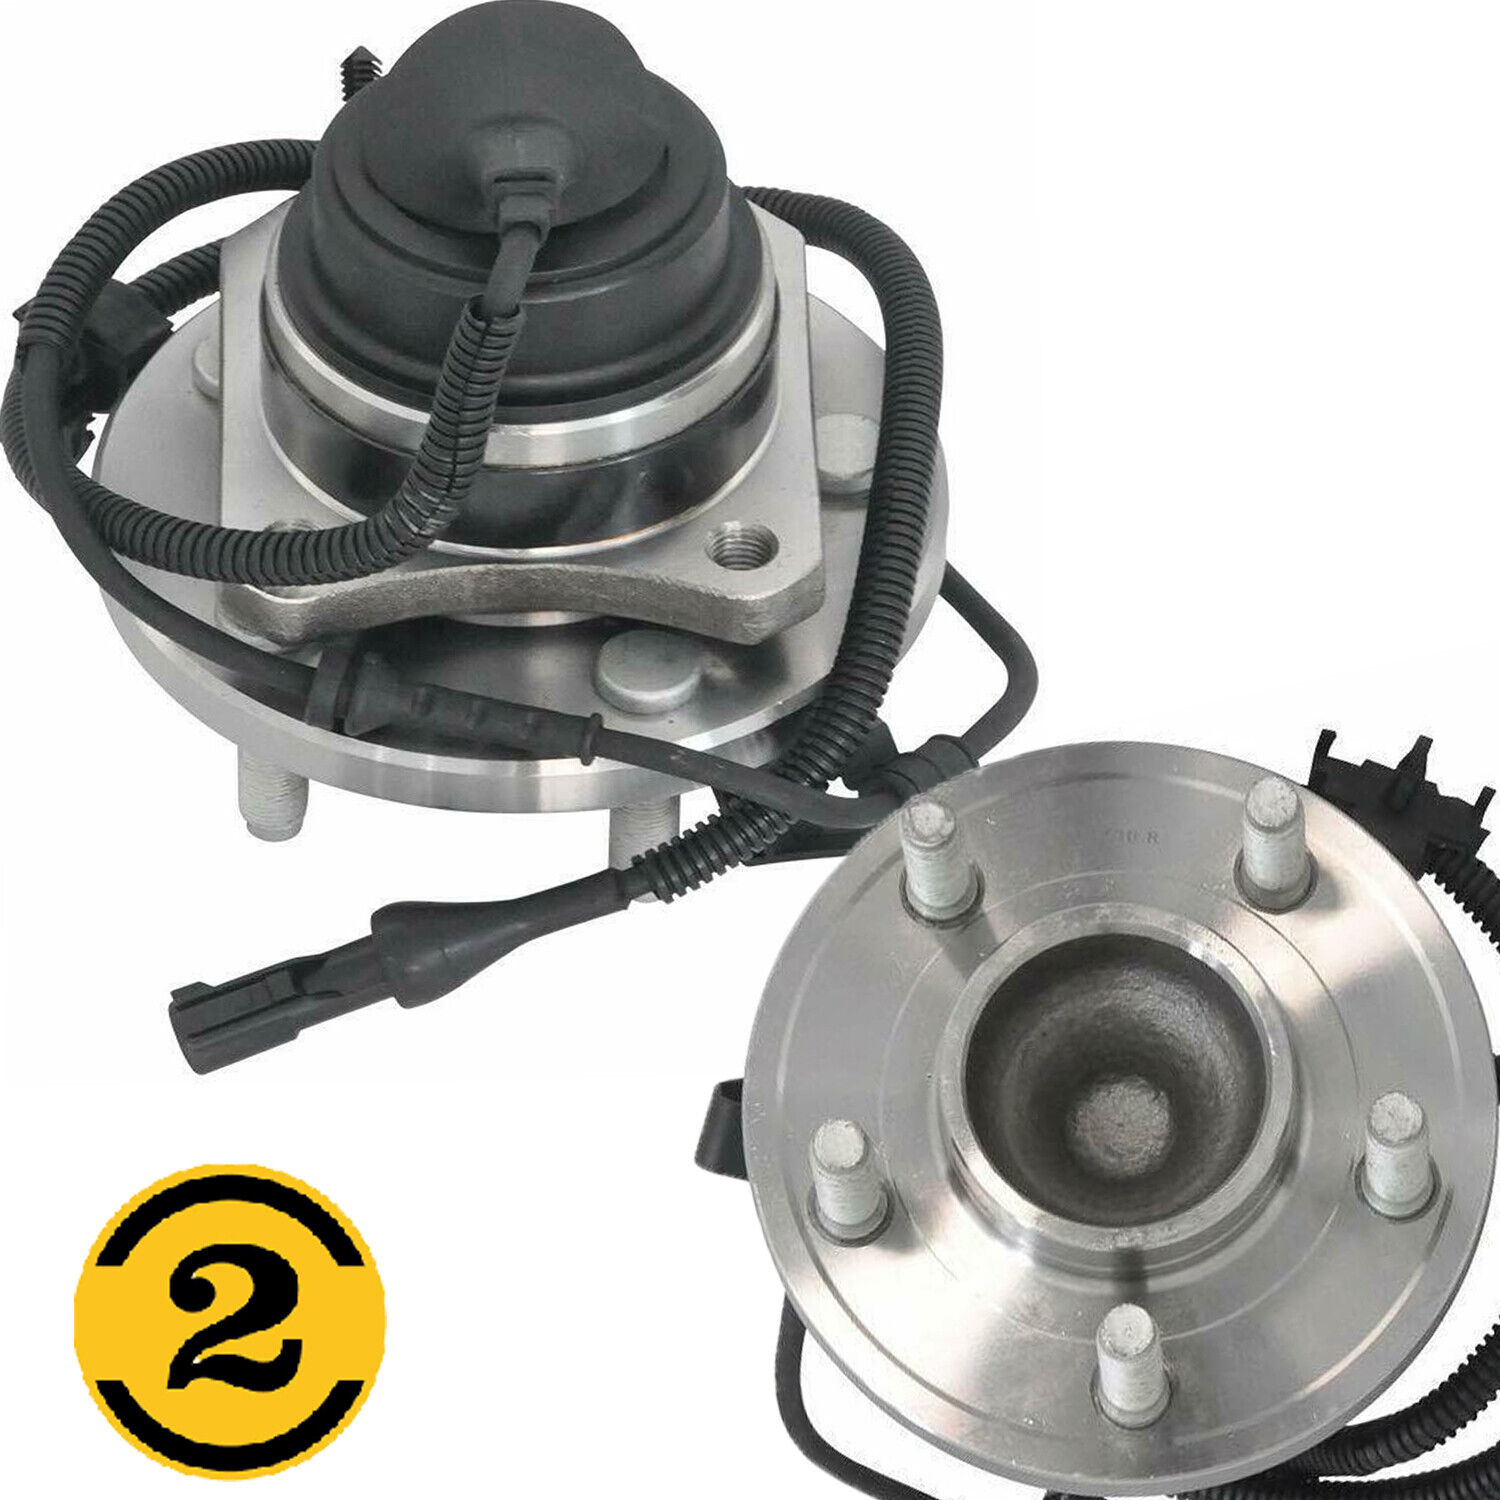 2pc Wheel Hubs Bearings Front for Town Car Crown Victoria 2005 - 2011 g6